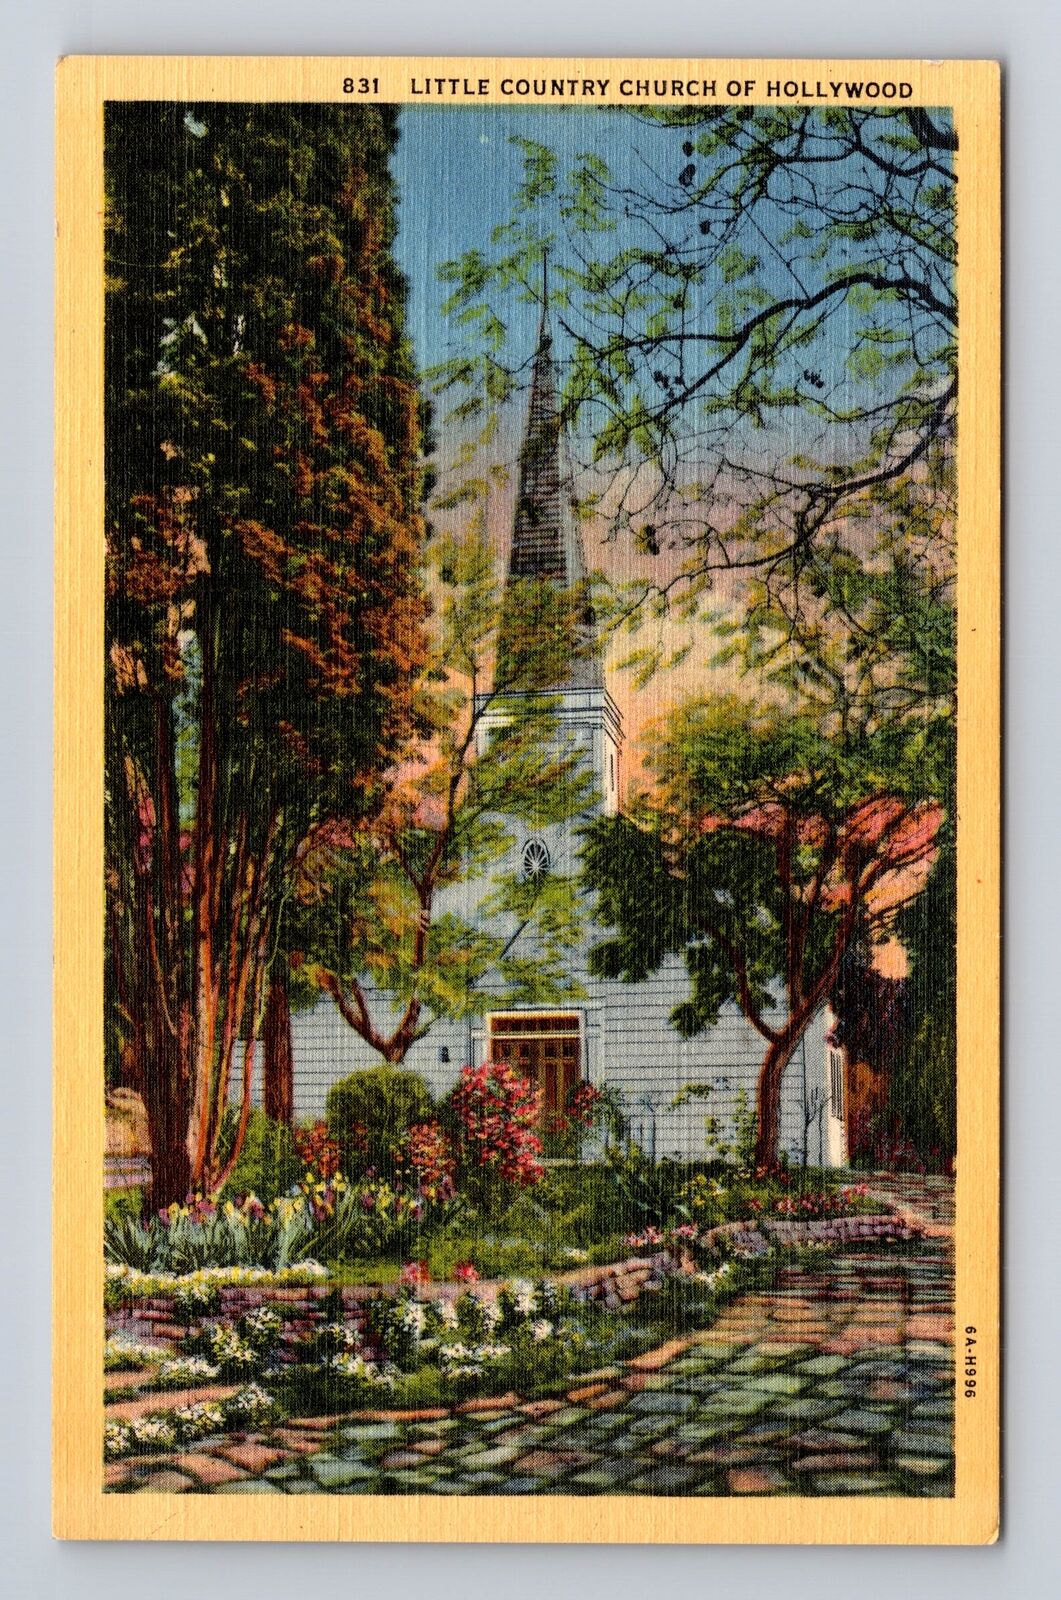 Hollywood CA-California, Little Country Church of Hollywood, Vintage Postcard